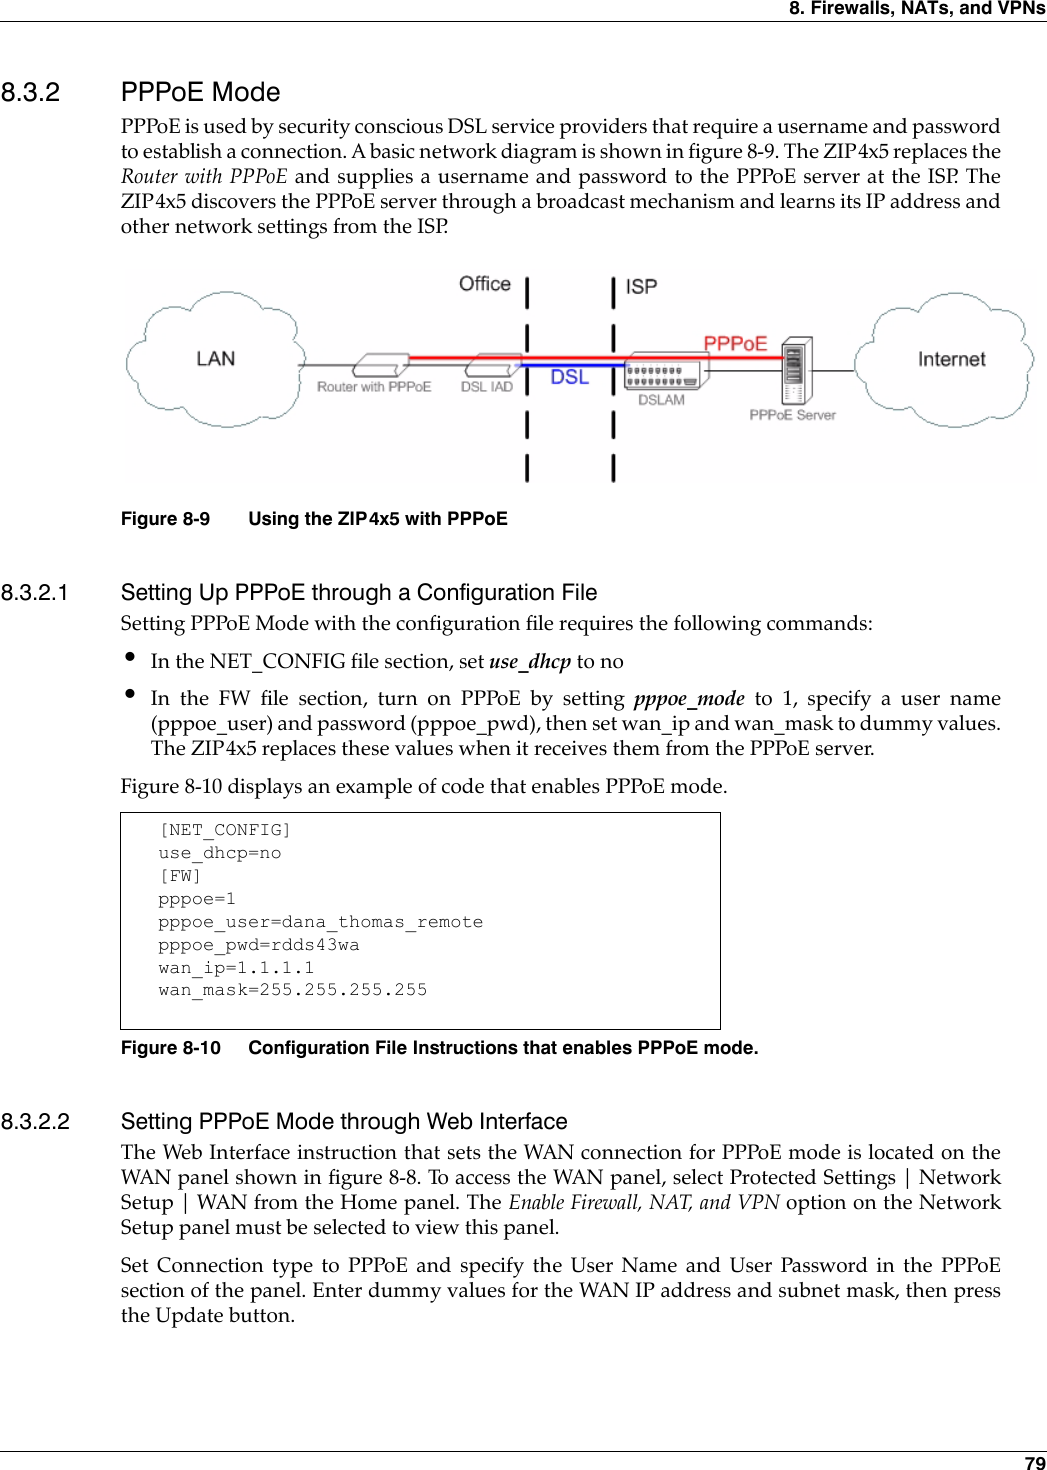 8. Firewalls, NATs, and VPNs 798.3.2 PPPoE ModePPPoE is used by security conscious DSL service providers that require a username and passwordto establish a connection. A basic network diagram is shown in figure 8-9. The ZIP4x5 replaces theRouter with PPPoE and supplies a username and password to the PPPoE server at the ISP. TheZIP4x5 discovers the PPPoE server through a broadcast mechanism and learns its IP address andother network settings from the ISP.8.3.2.1 Setting Up PPPoE through a Configuration FileSetting PPPoE Mode with the configuration file requires the following commands:•In the NET_CONFIG file section, set use_dhcp to no•In the FW file section, turn on PPPoE by setting pppoe_mode to 1, specify a user name(pppoe_user) and password (pppoe_pwd), then set wan_ip and wan_mask to dummy values.The ZIP4x5 replaces these values when it receives them from the PPPoE server.Figure 8-10 displays an example of code that enables PPPoE mode.8.3.2.2 Setting PPPoE Mode through Web InterfaceThe Web Interface instruction that sets the WAN connection for PPPoE mode is located on theWAN panel shown in figure 8-8. To access the WAN panel, select Protected Settings | NetworkSetup | WAN from the Home panel. The Enable Firewall, NAT, and VPN option on the NetworkSetup panel must be selected to view this panel. Set Connection type to PPPoE and specify the User Name and User Password in the PPPoEsection of the panel. Enter dummy values for the WAN IP address and subnet mask, then pressthe Update button.Figure 8-9 Using the ZIP4x5 with PPPoE[NET_CONFIG]use_dhcp=no[FW]pppoe=1pppoe_user=dana_thomas_remotepppoe_pwd=rdds43wawan_ip=1.1.1.1wan_mask=255.255.255.255Figure 8-10 Configuration File Instructions that enables PPPoE mode.